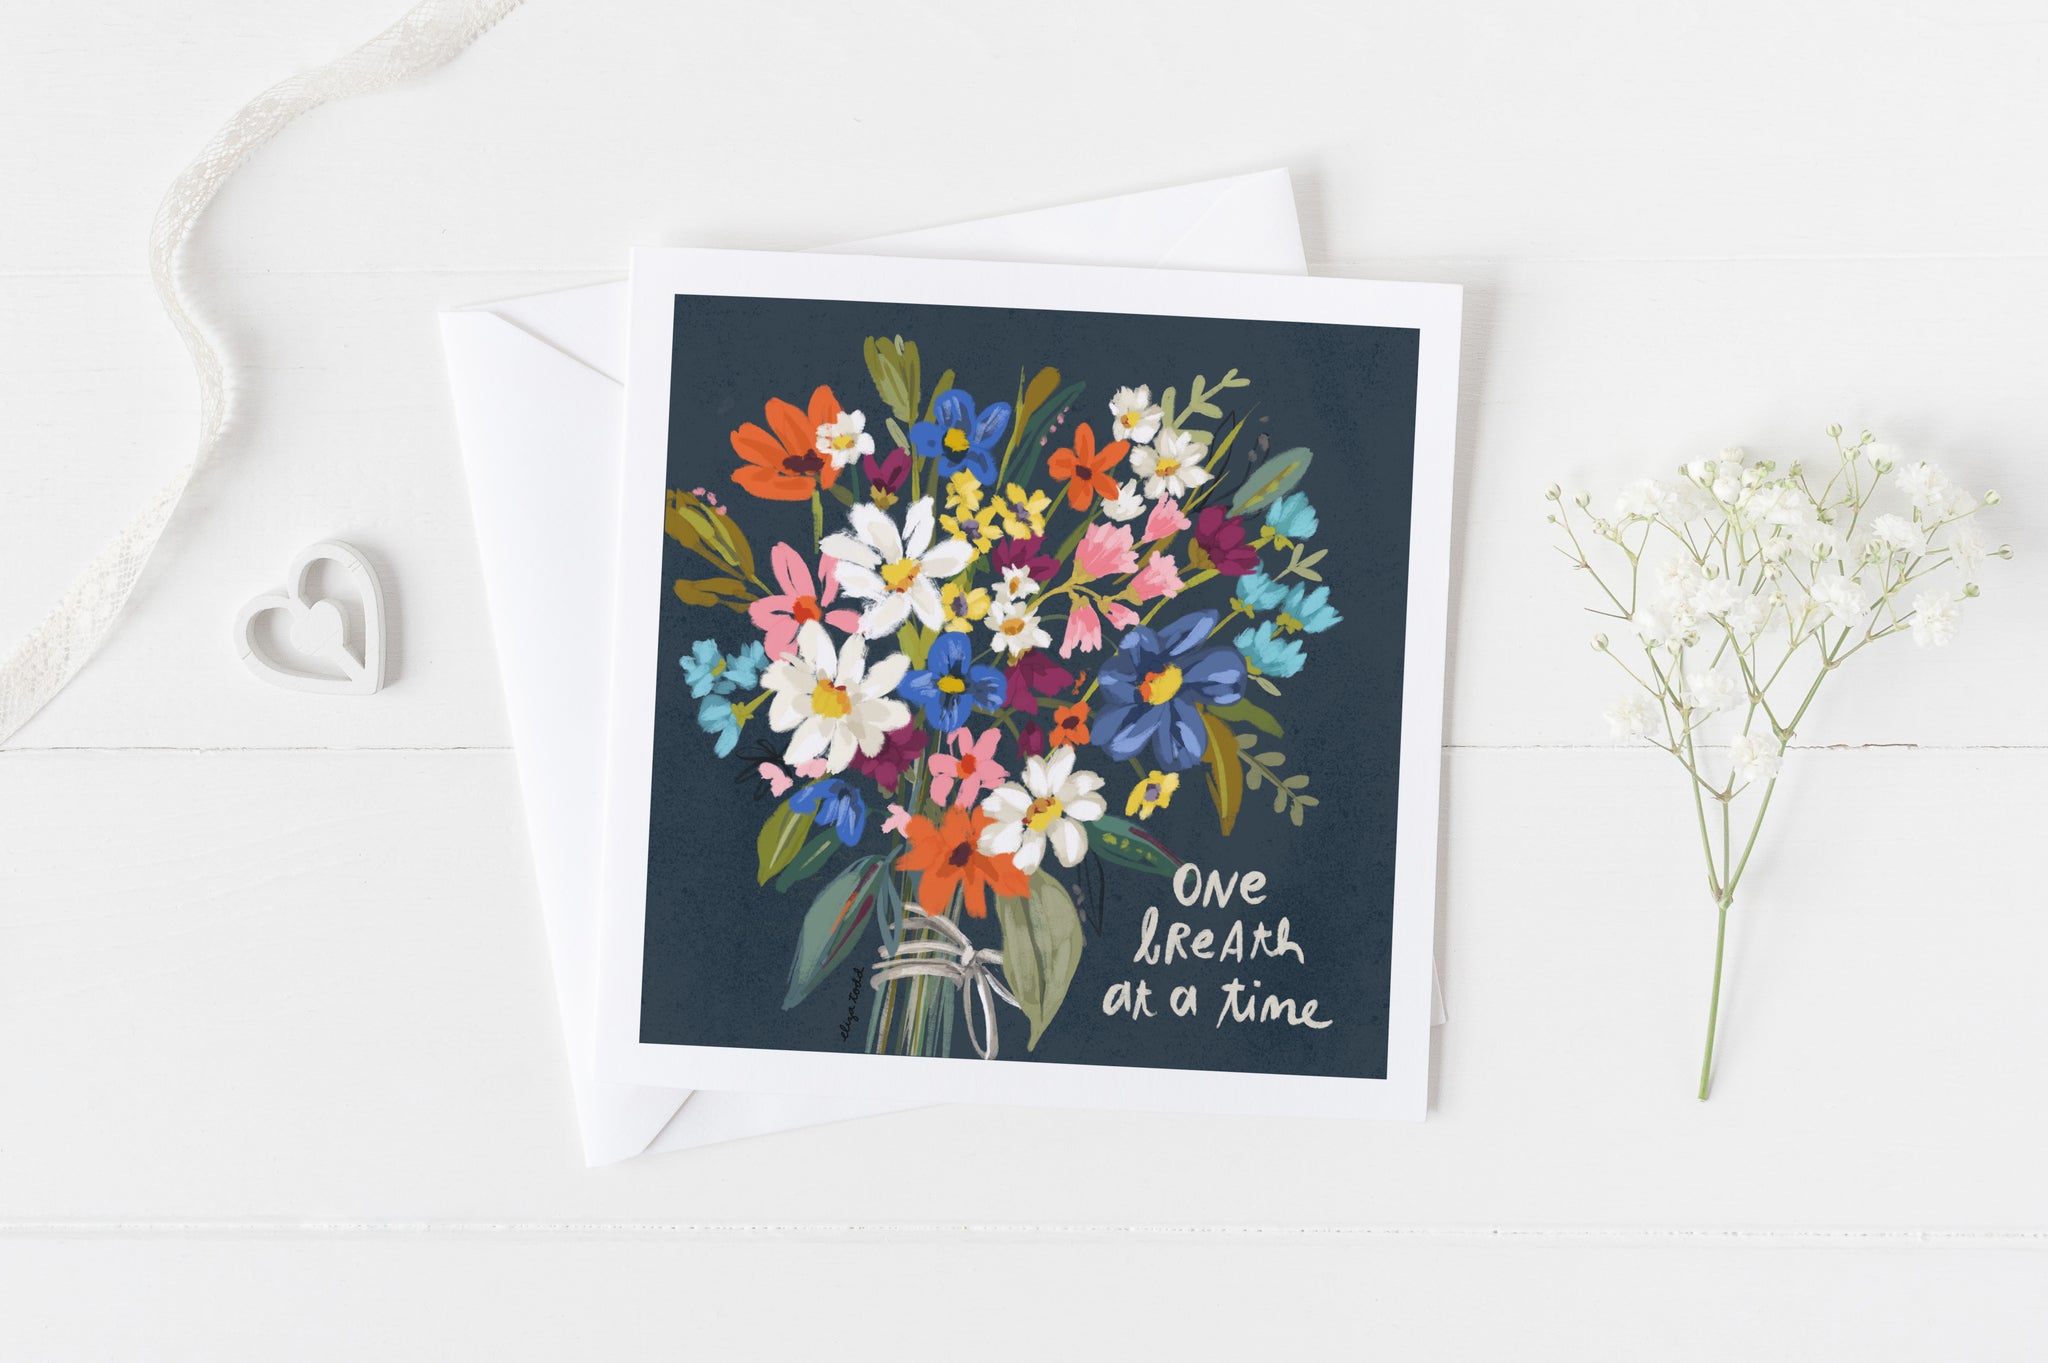 5x5 greeting card by Eliza Todd featuring a bouquet of flowers, saying "One breath at a time." - APeaceofWerk.com